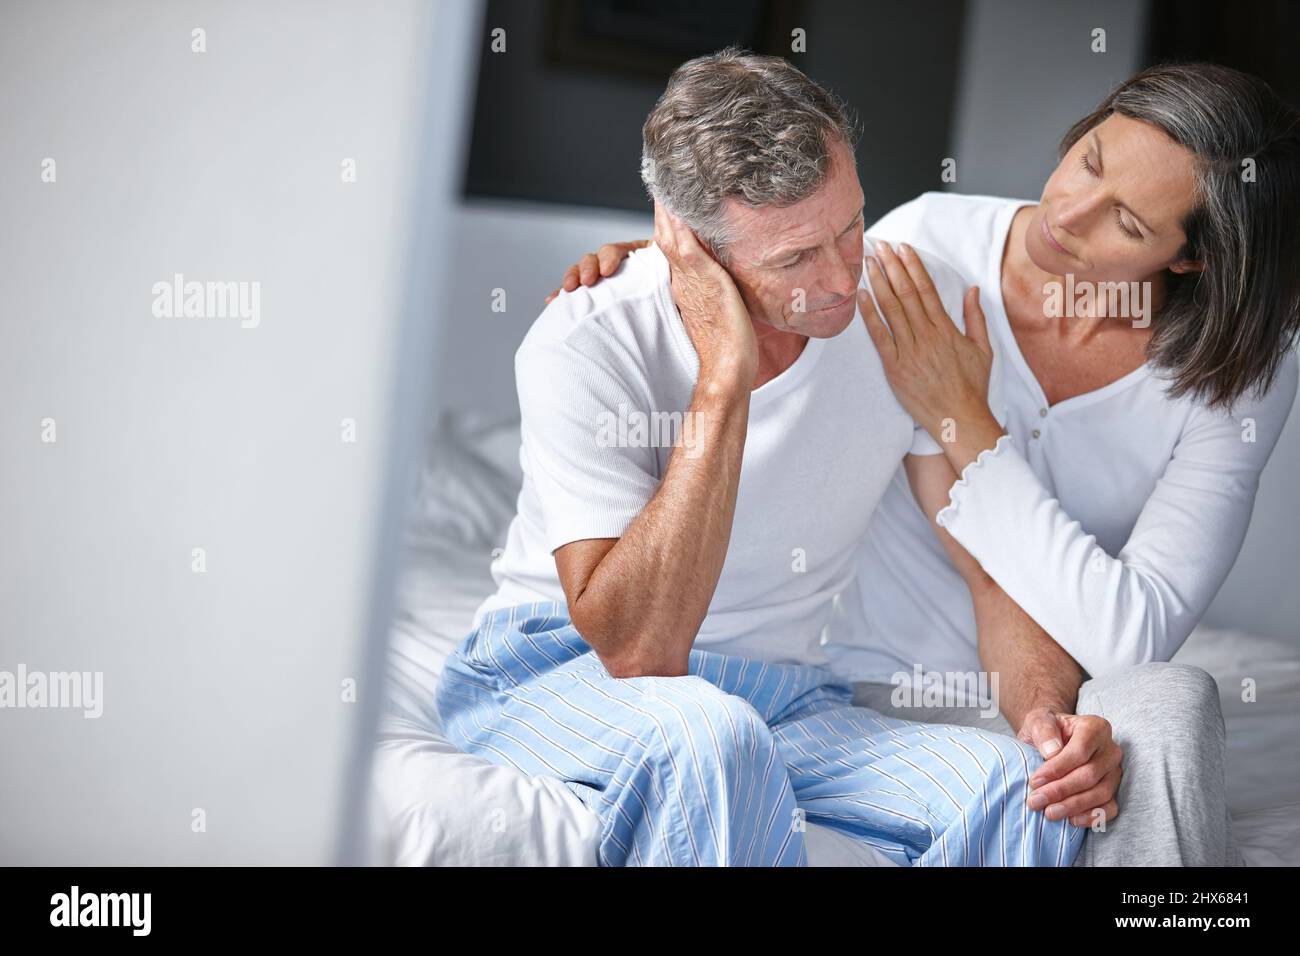 Supporting her husband through a tough time. Shot of a mature woman consoling her husband whos feeling depressed. Stock Photo